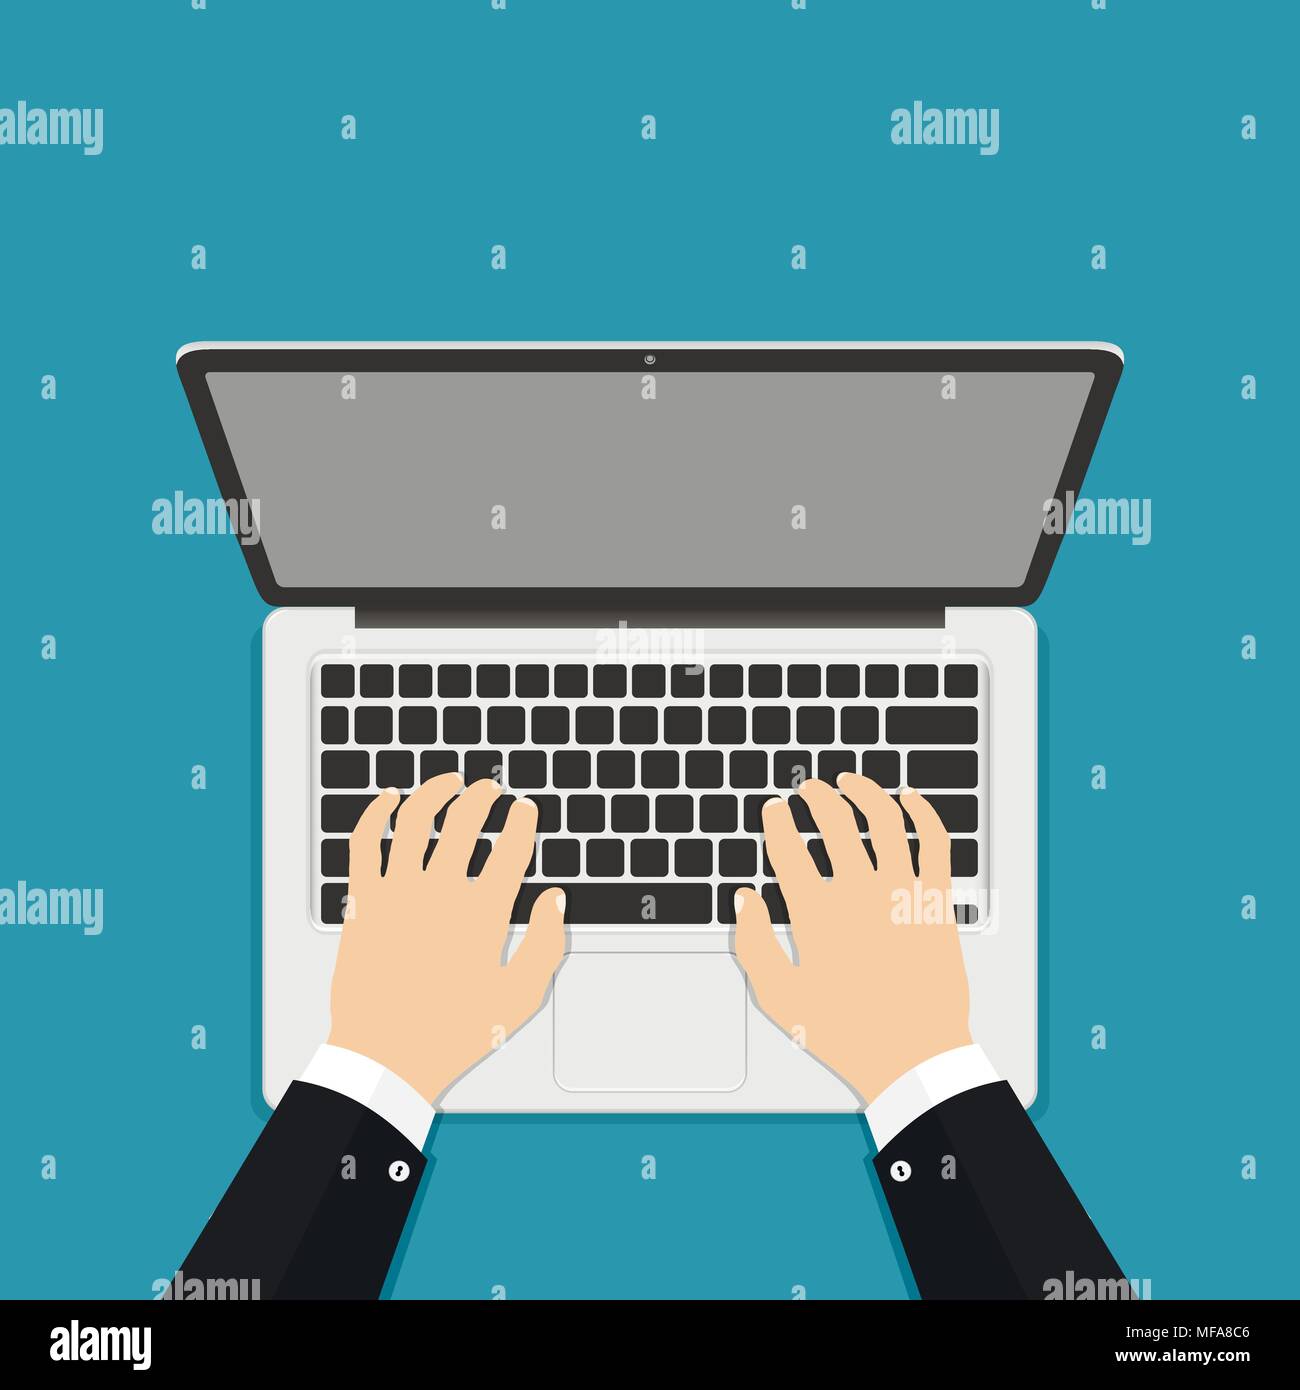 Businessman hands on laptop keyboard with blank screen monitor. Flat style vector illustration. Stock Vector